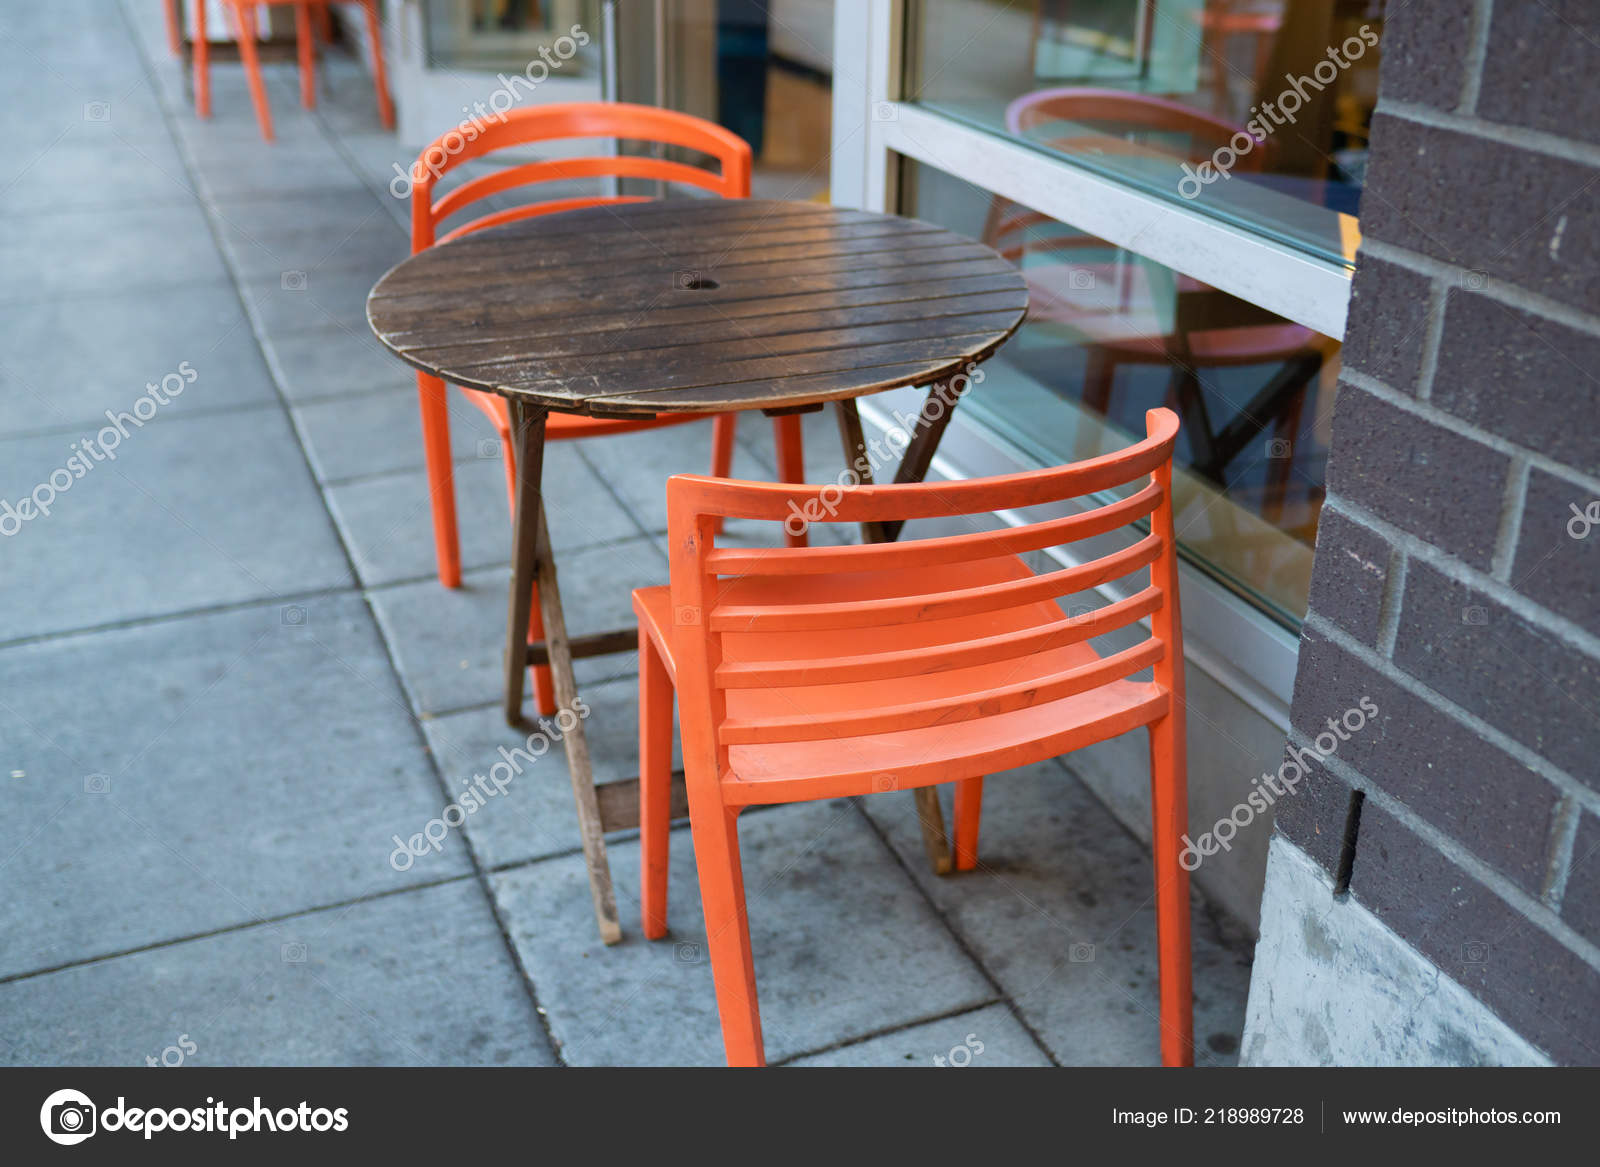 Wooden Table Orange Chairs Pearl District Downtown Portland Oregon